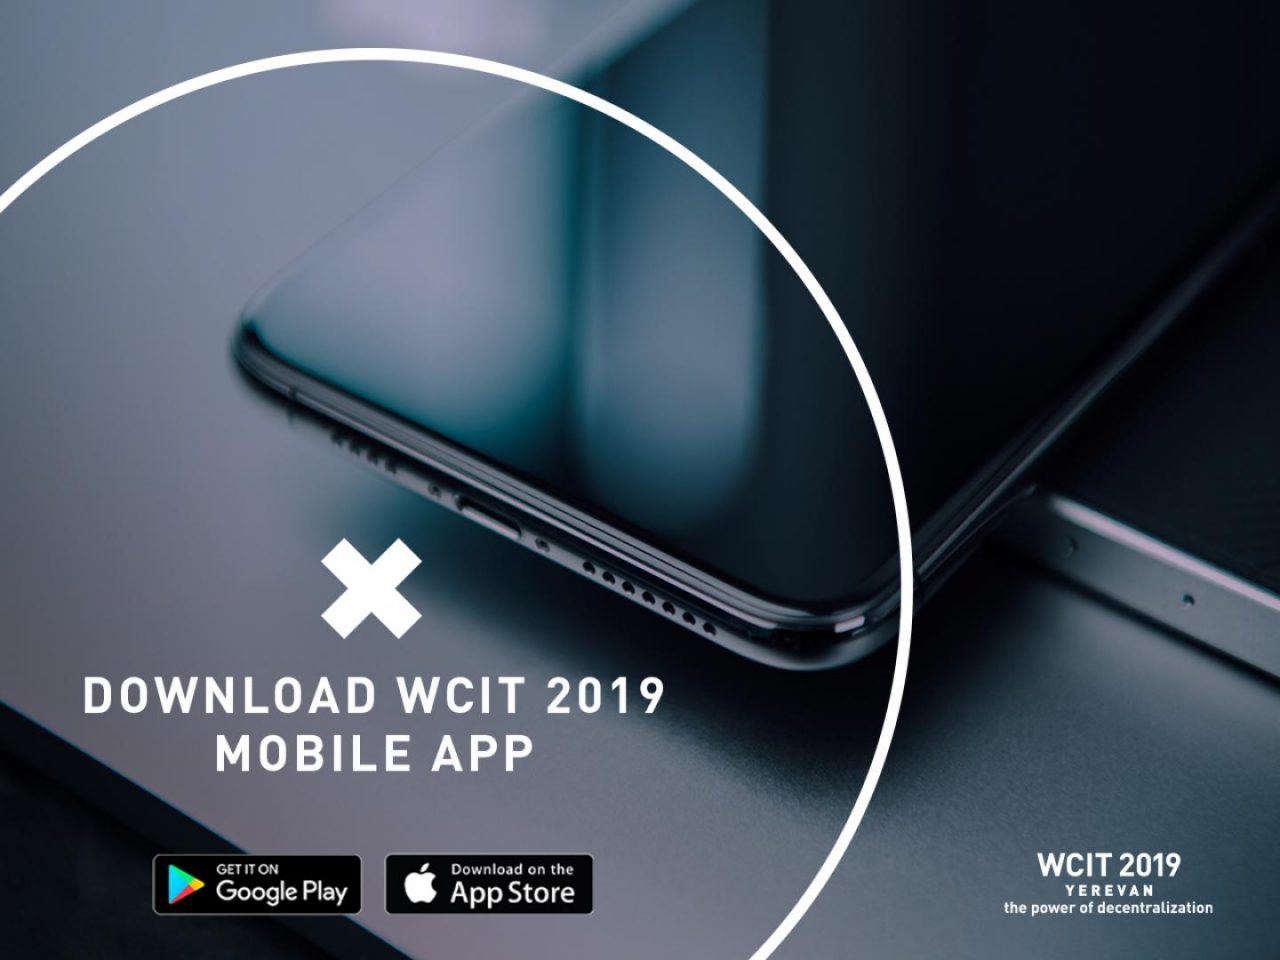 Navigate WCIT 2019 with this dedicated app